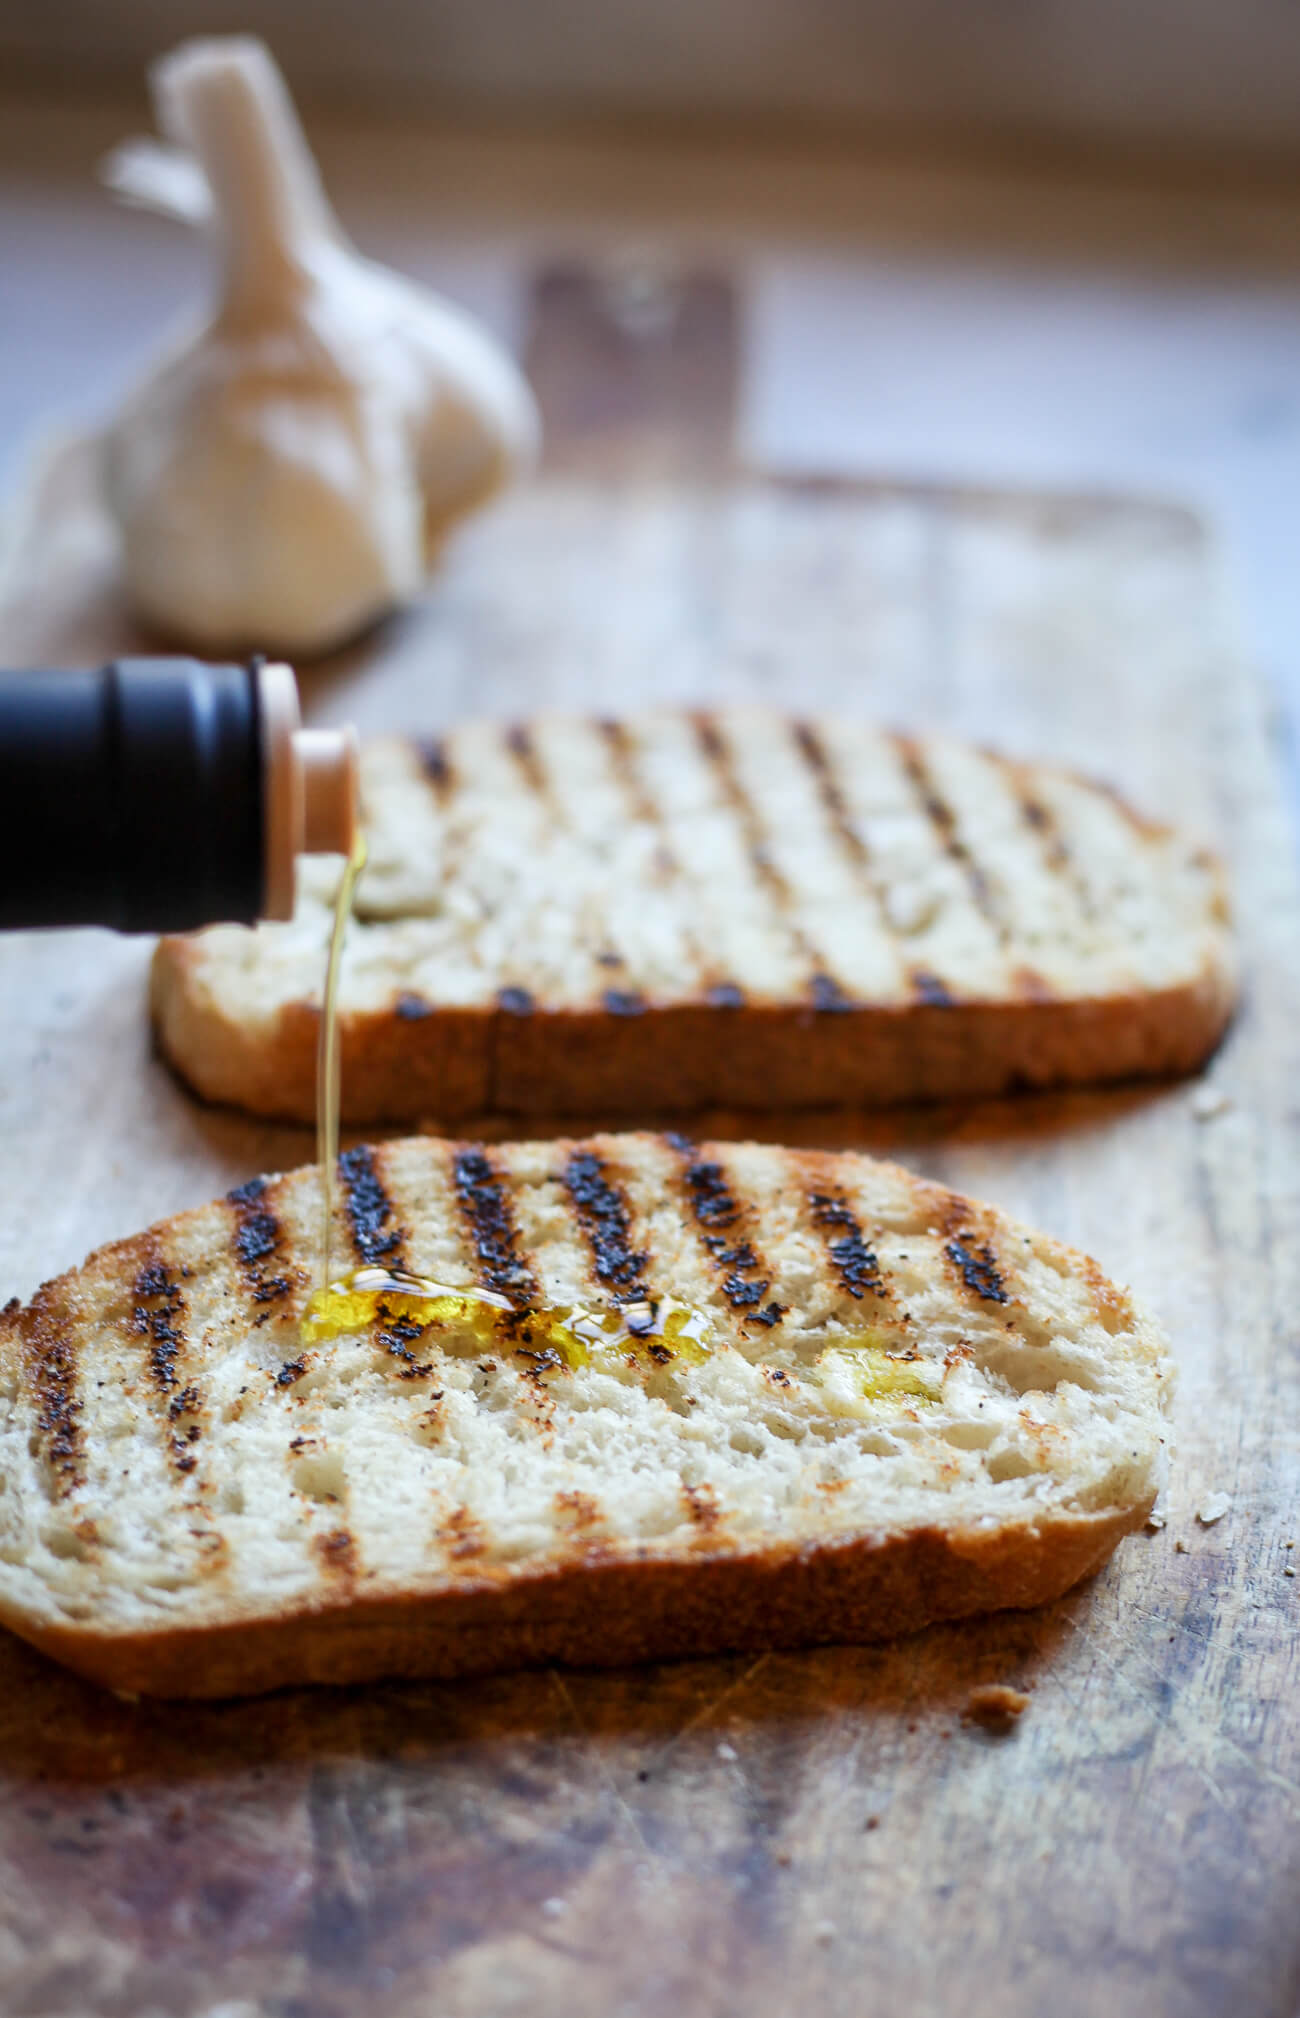 Extra virgin olive oil is drizzled over a piece of grilled Italian bread to make authentic bruschetta (fettunta).